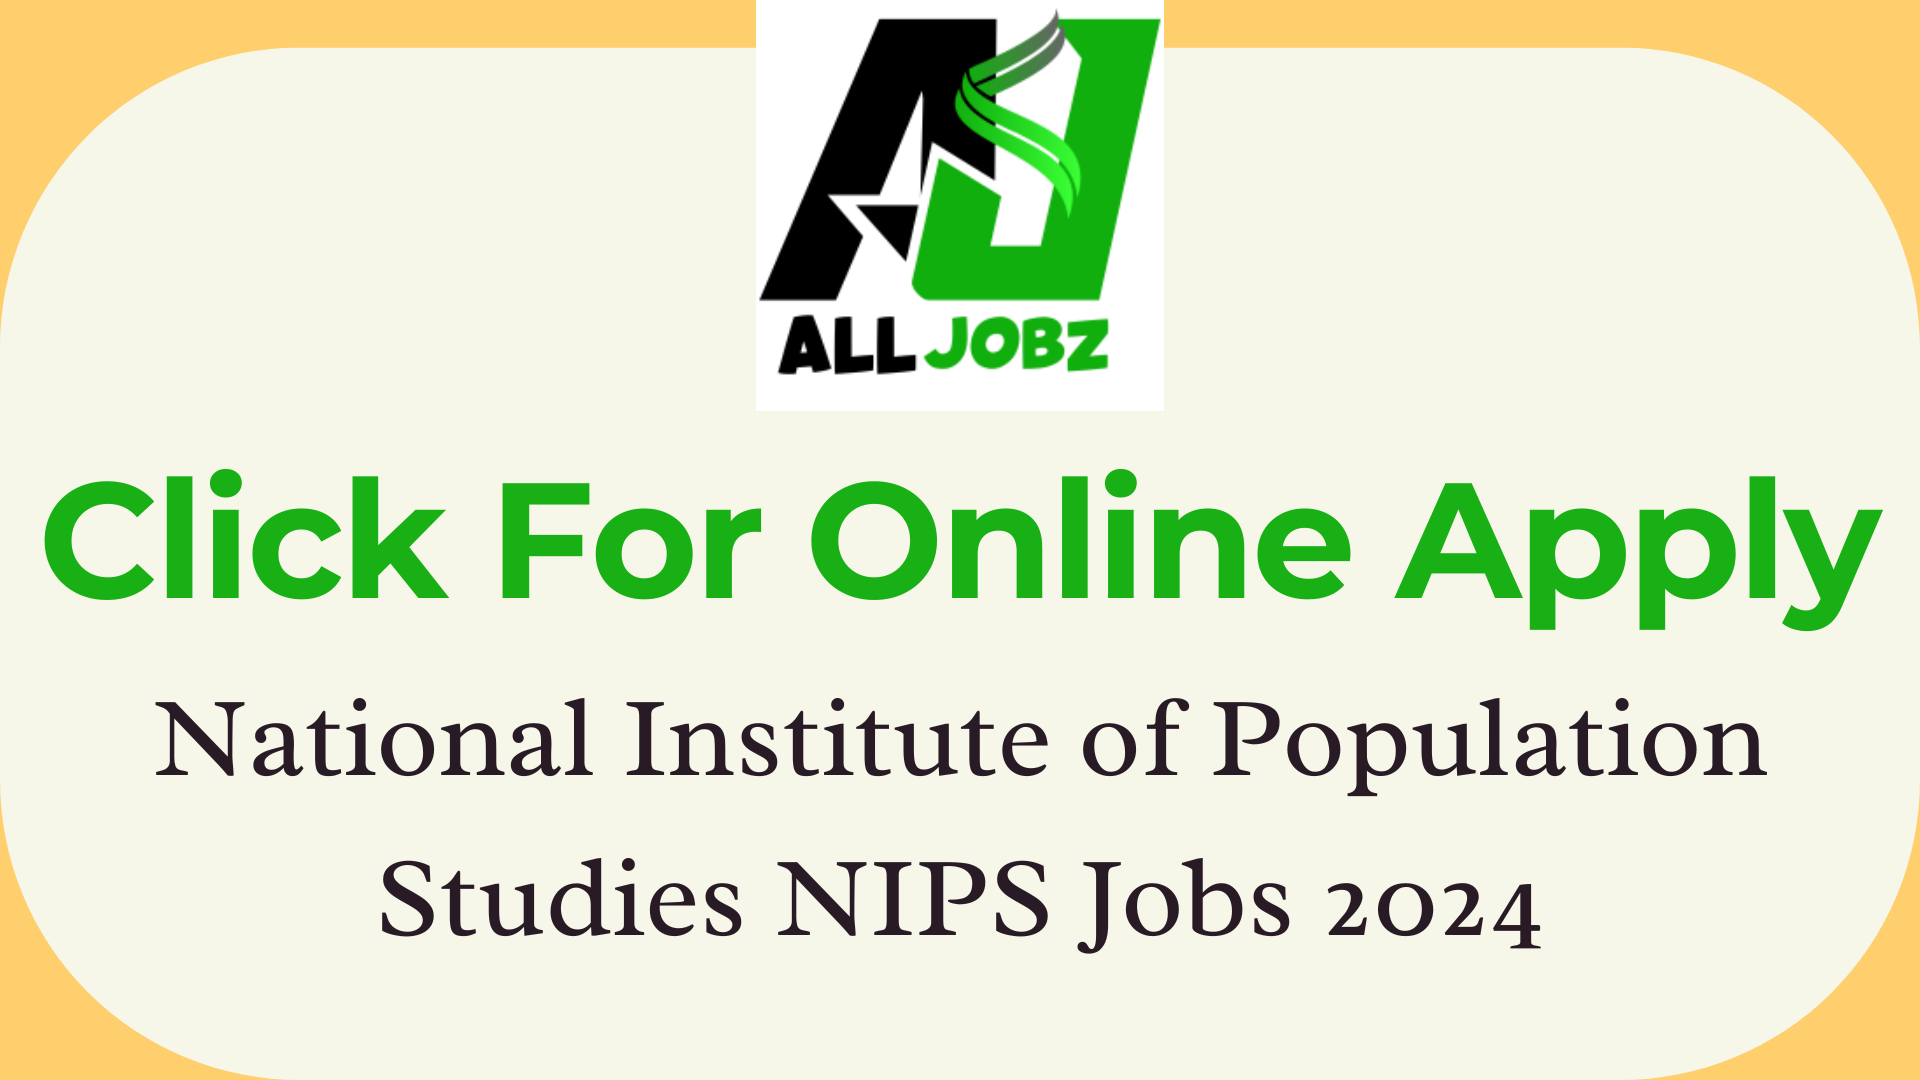 National Institute Of Population Studies Nips Jobs Online Apply For Facilitator, Data Processing Manager, Data Analyst, Data Entry Supervisor, Office Coordinator, Provincial Coordinator, Quality Control, Supervisors, Enumerators (Male &Amp; Female), Lister, Mapper, National Institute Of Population Studies Nips Jobs Salary, National Institute Of Population Studies Nips Jobs Apply Online, Nips Jobs 2024, Www.nip.gov.pk Jobs Apply Online, Nips.org.pk Jobs, Nip Application Form, National Institute Jobs, Niph Jobs,